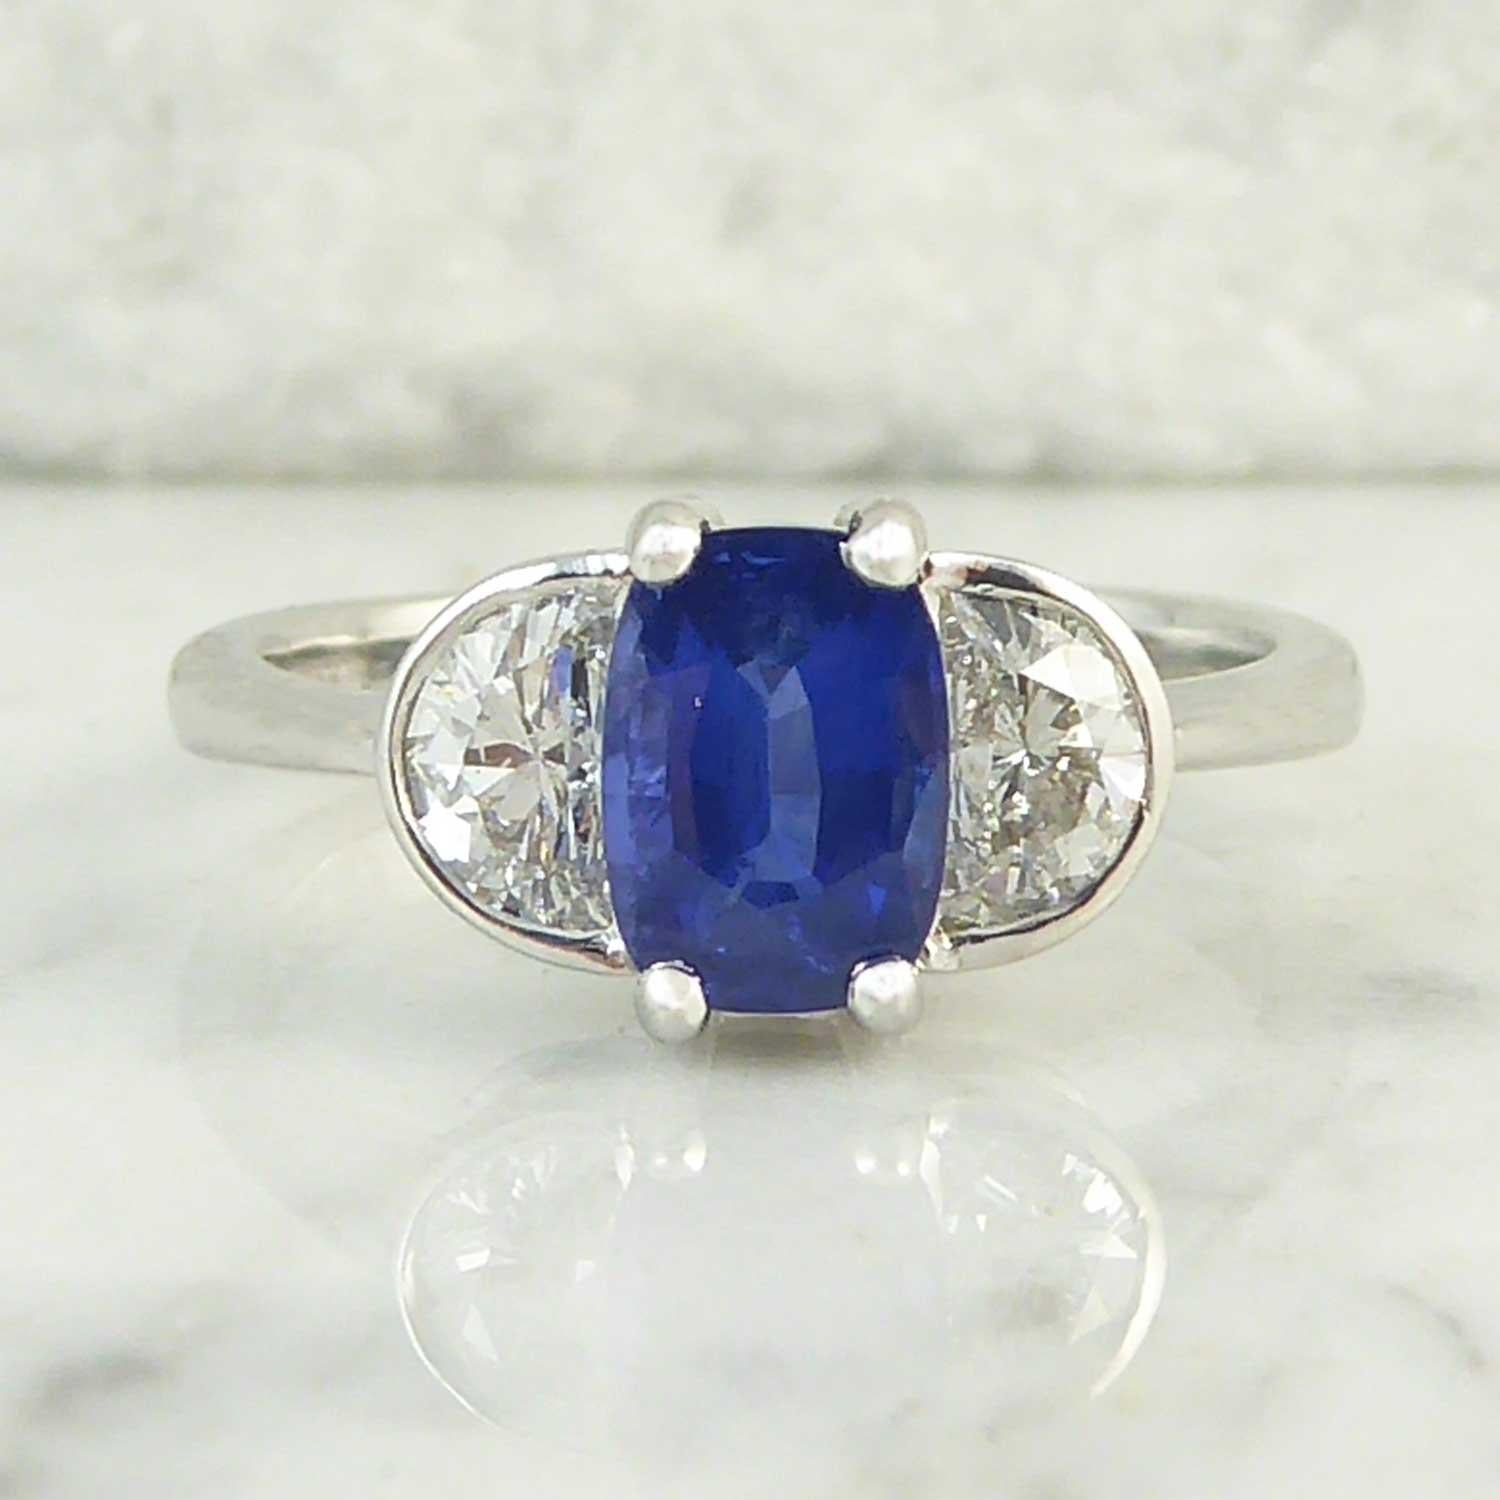 We have had this pretty and unusual modern sapphire and diamond ring made in our workshops.  It is set to the centre with an oval mixed cut sapphire of rich blue colour (probably heat treated as the vast majority of sapphires are) but what set this